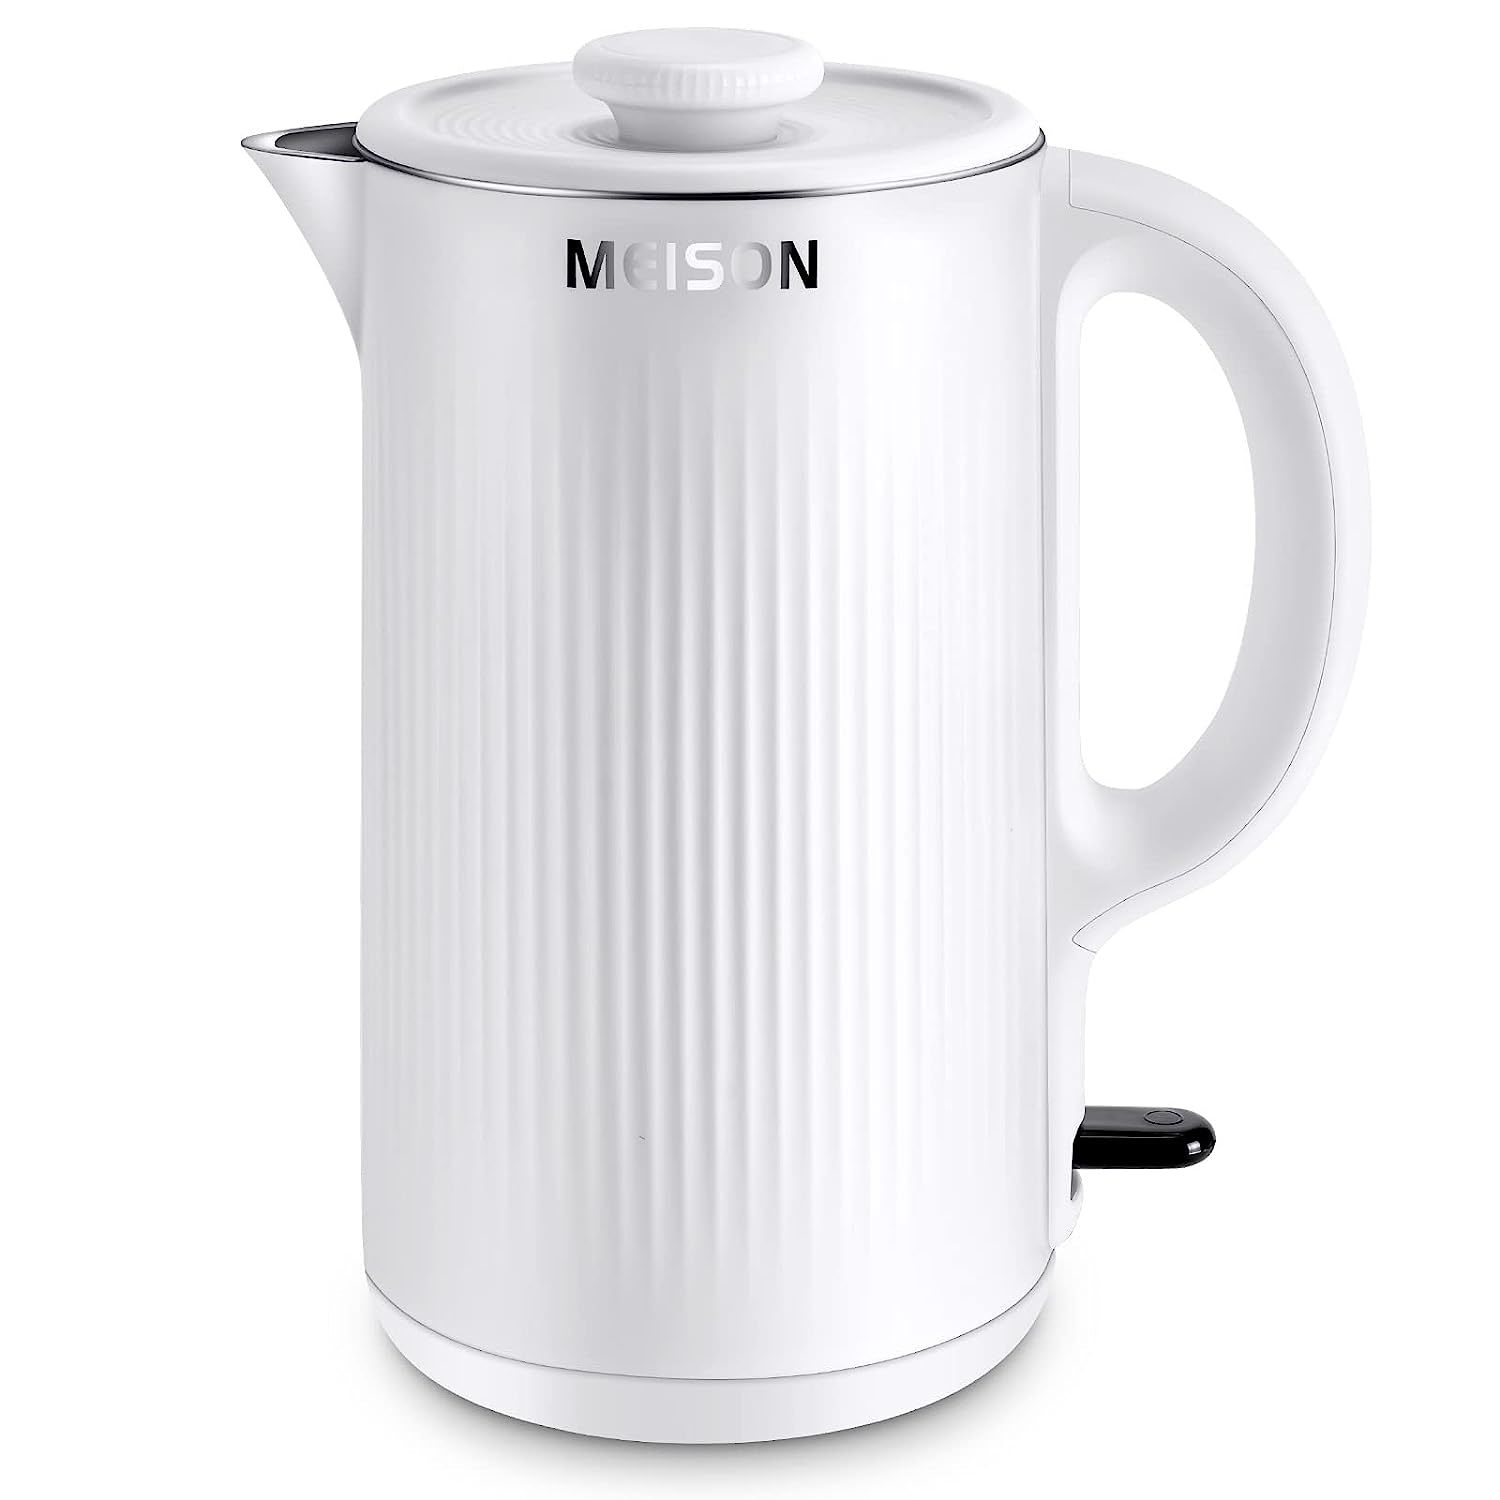 MEISON SYK-003 Electric Kettles Stainless Steel Interior, Double Wall Hot  Water Boiler Heater, Cool Touch Electric Teapot Heater Kettle, Auto